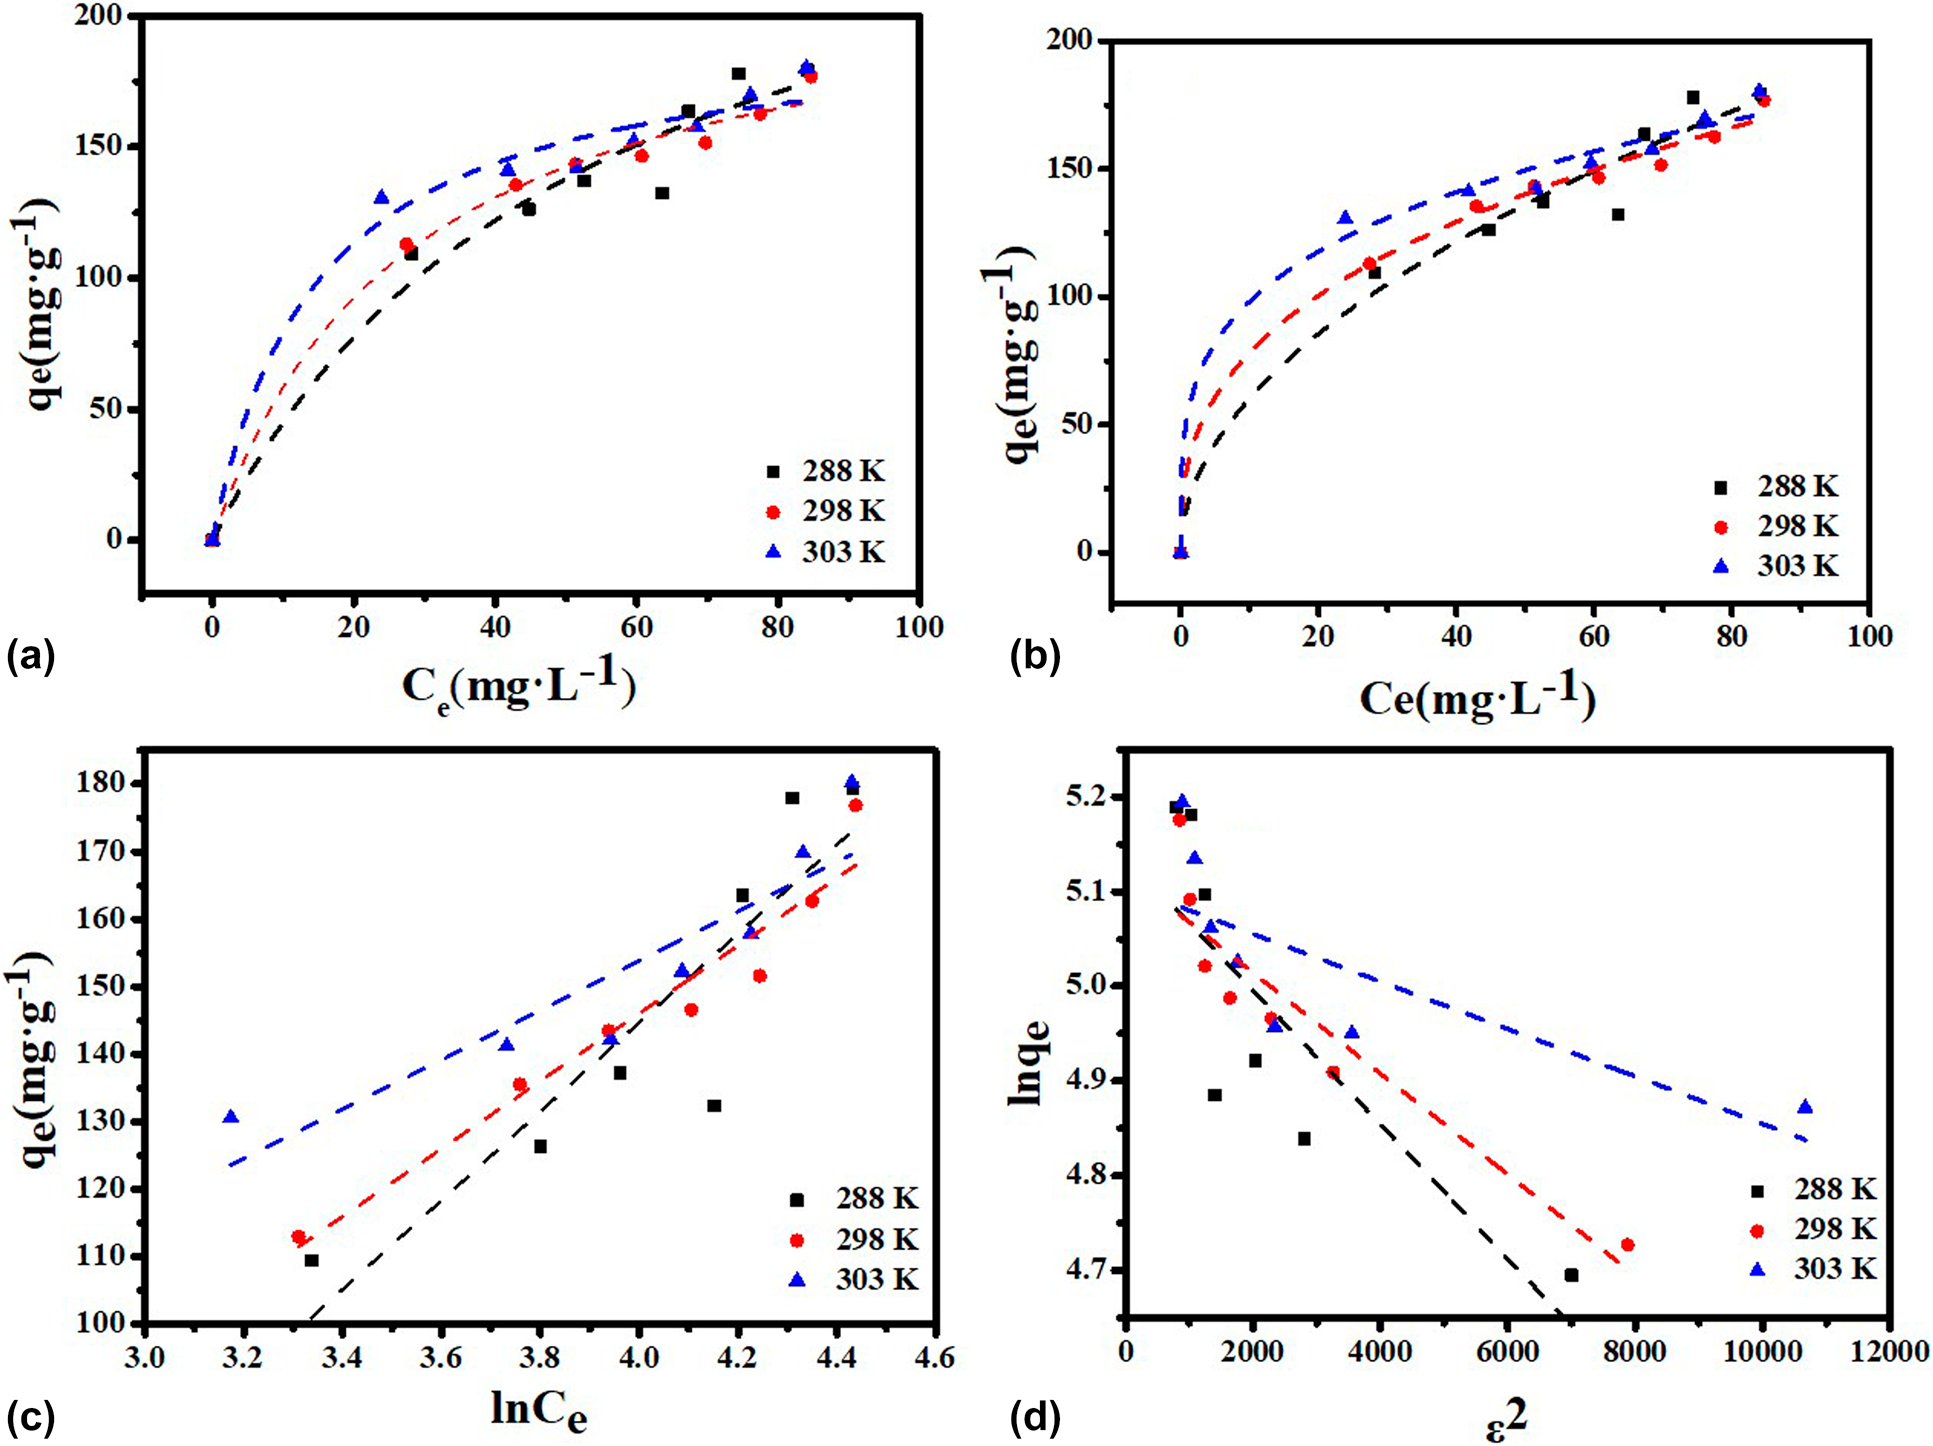 Single-crystal ZrCo nanoparticle for advanced hydrogen and H-isotope  storage